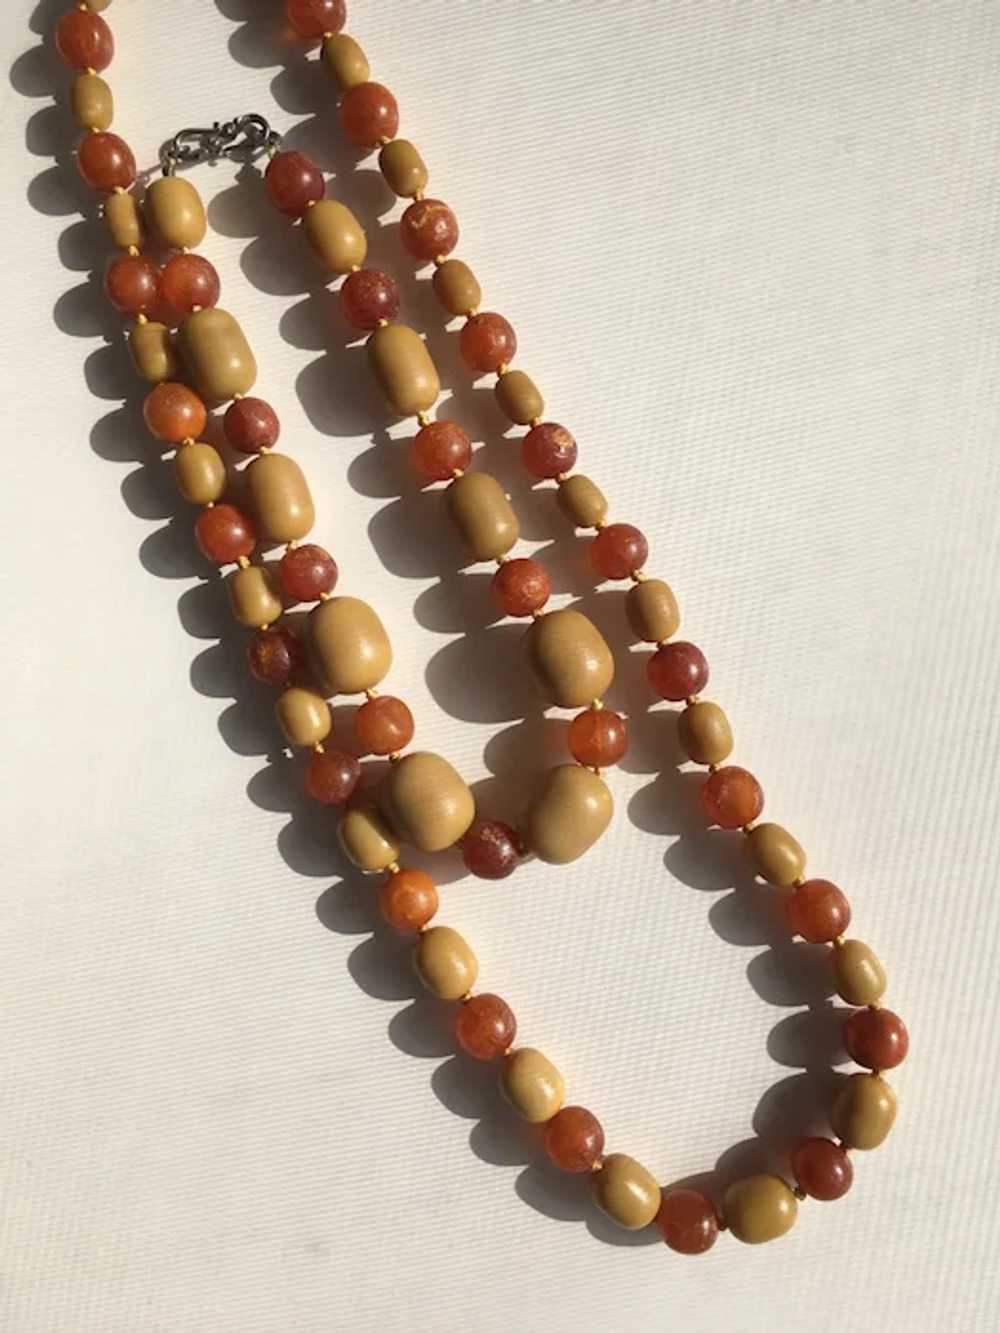 Two Amber Necklaces, Unpolished Oval & Round Beads - image 3